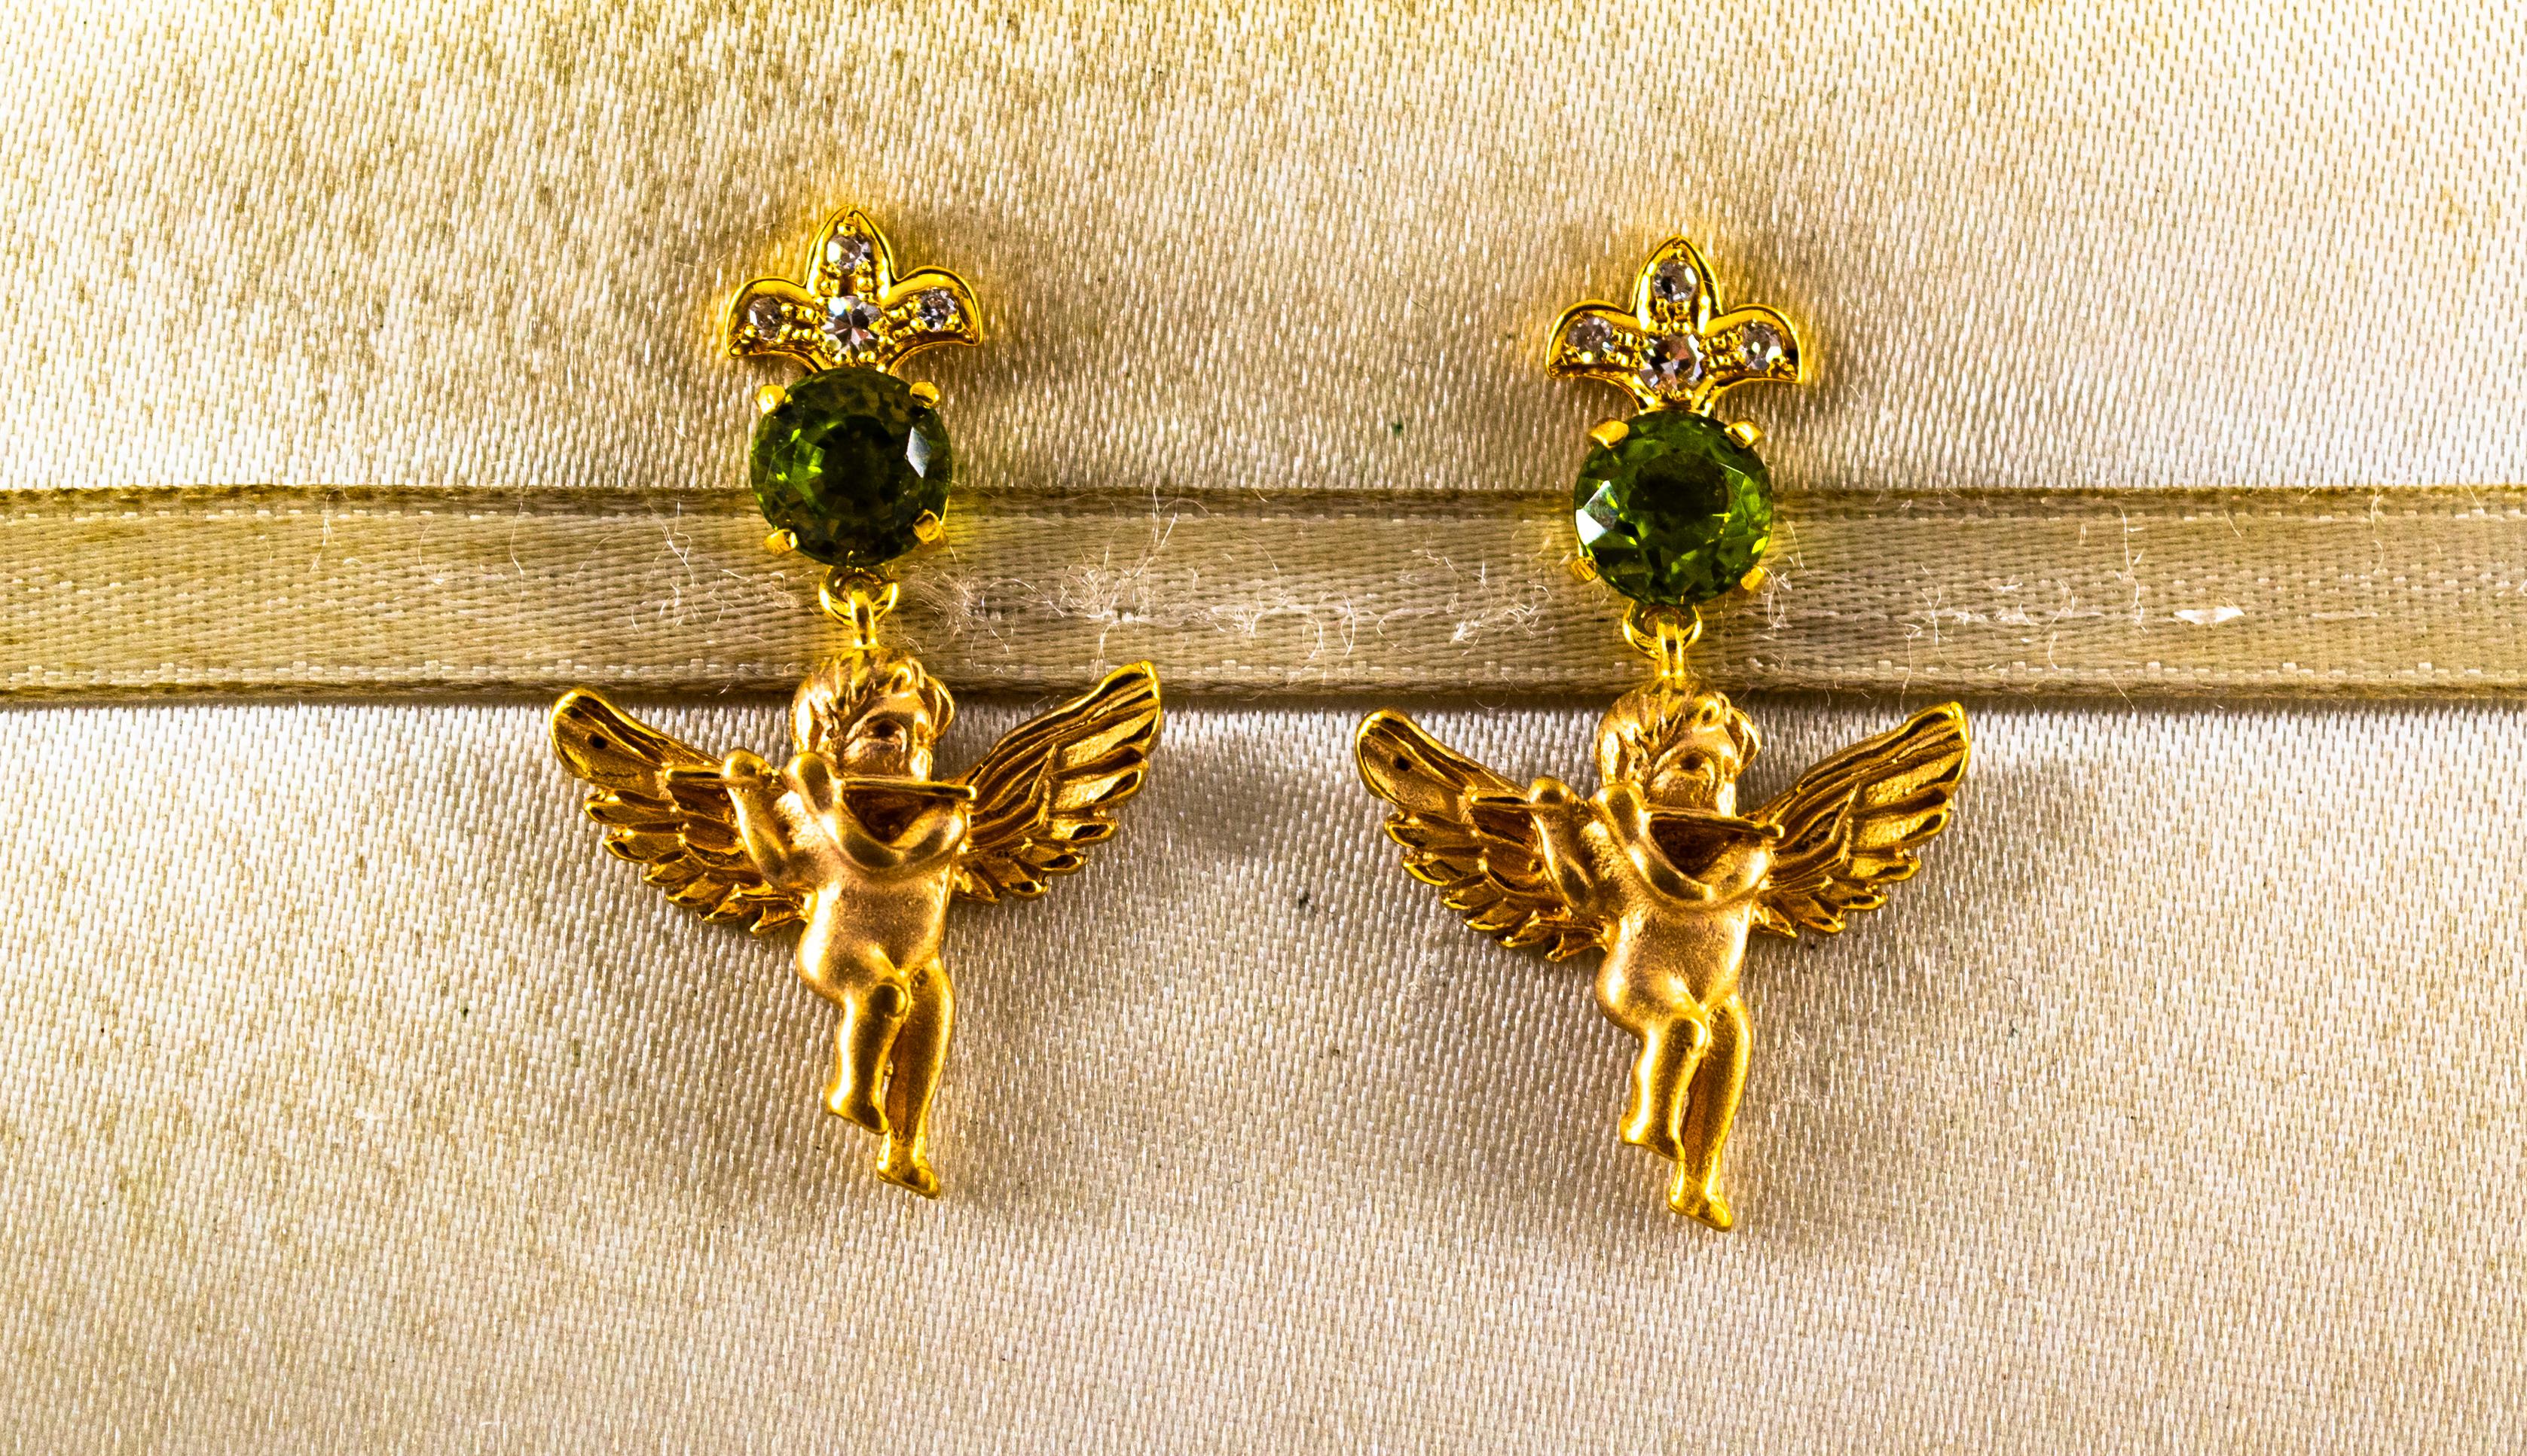 These Earrings are made of 9K Yellow Gold.
These Earrings have 0.20 Carats of White Brilliant Cut Diamonds.
These Earrings have 2.60 Carats of Peridots.

These Earrings are inspired by Art Nouveau.

All our Earrings have pins for pierced ears but we